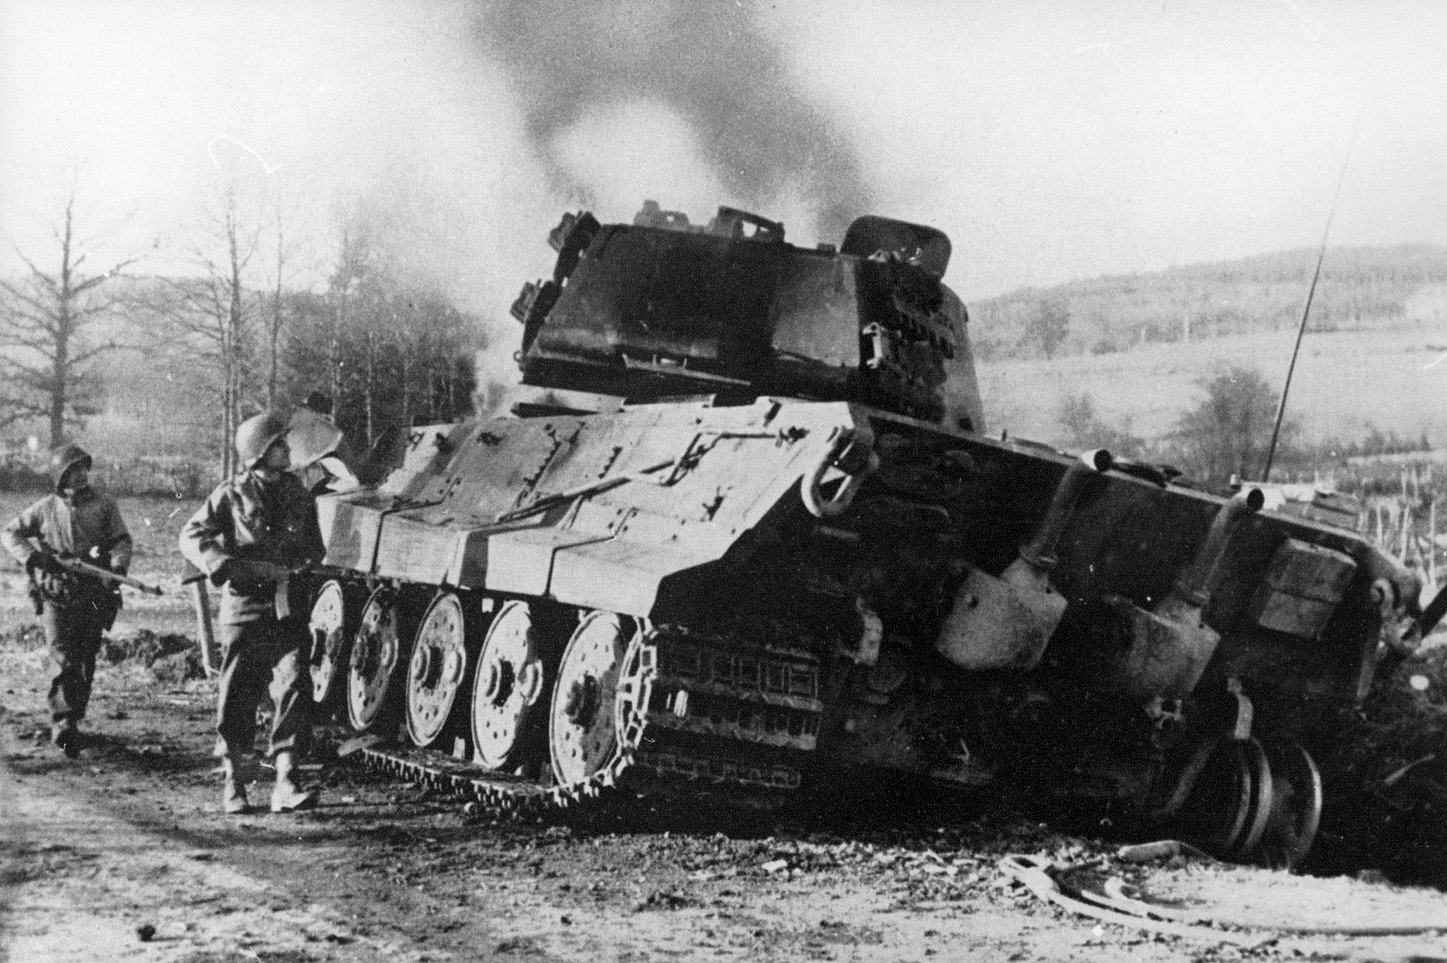 Two American soldiers advance down a muddy road near the Belgian village of La Gleize and glance at the smoking hulk of a German Panther medium tank that has recently been destroyed. 